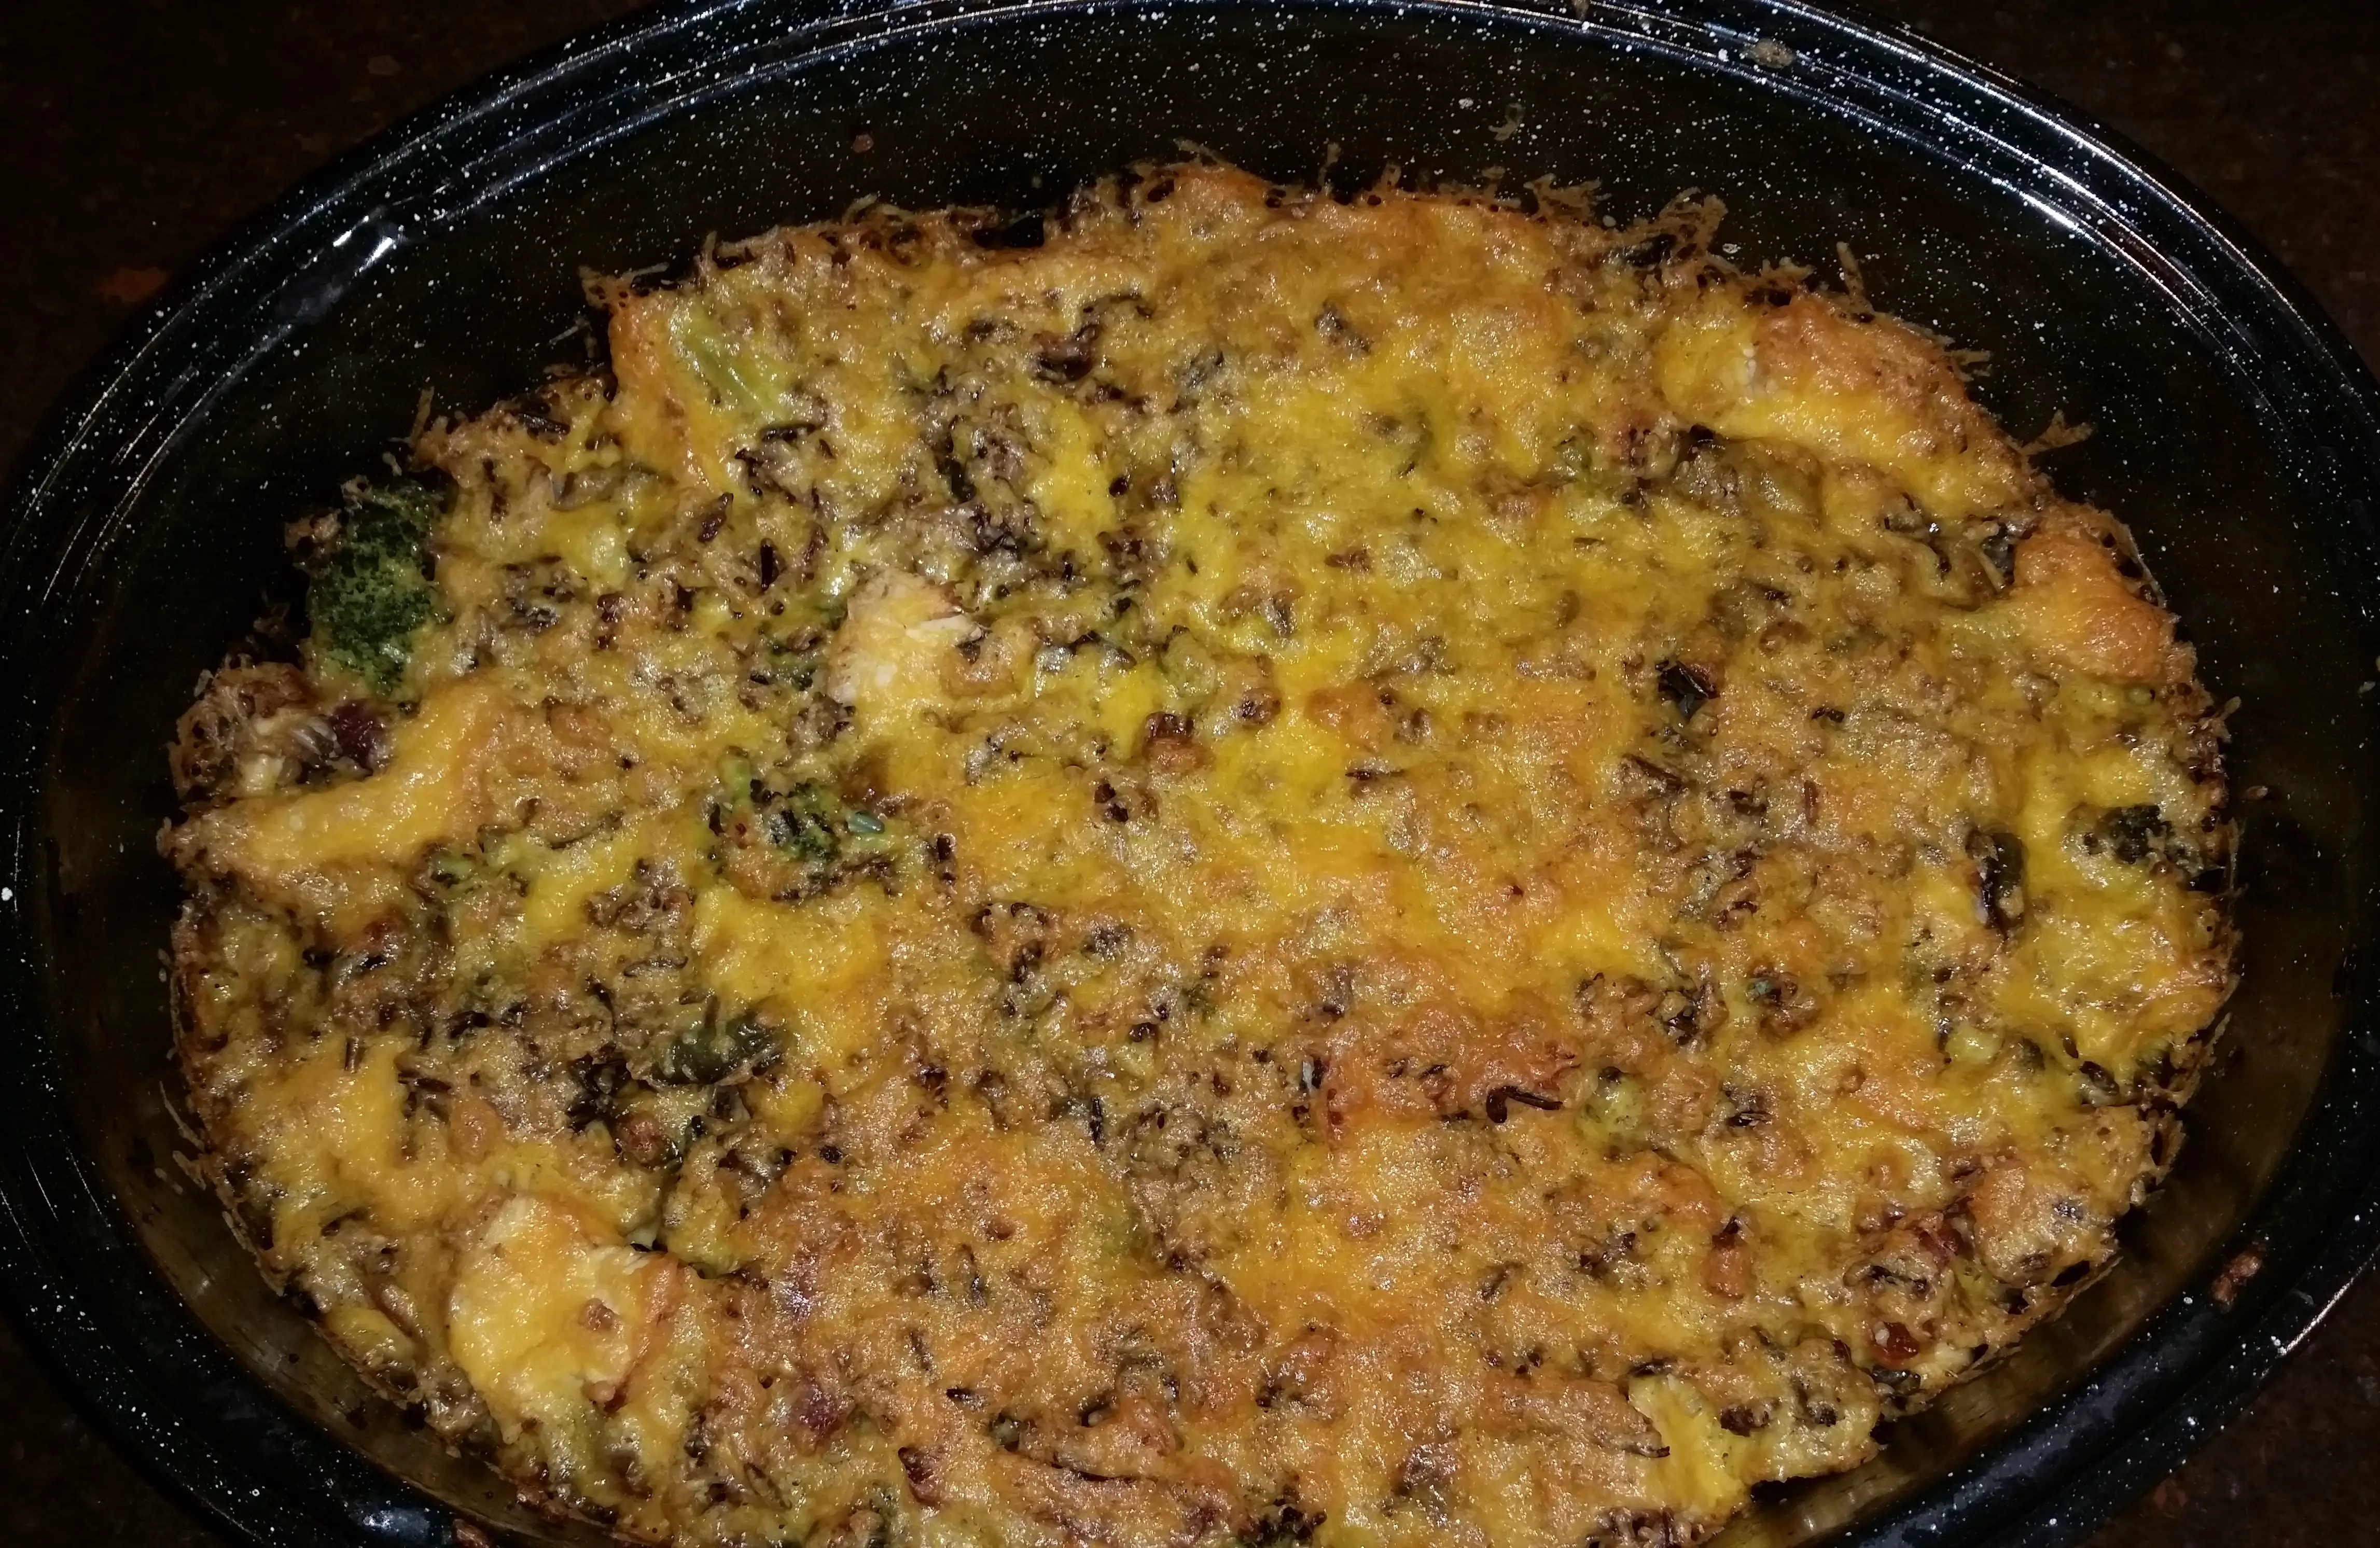 rice chicken vegetables and cheese casserole ready to eat